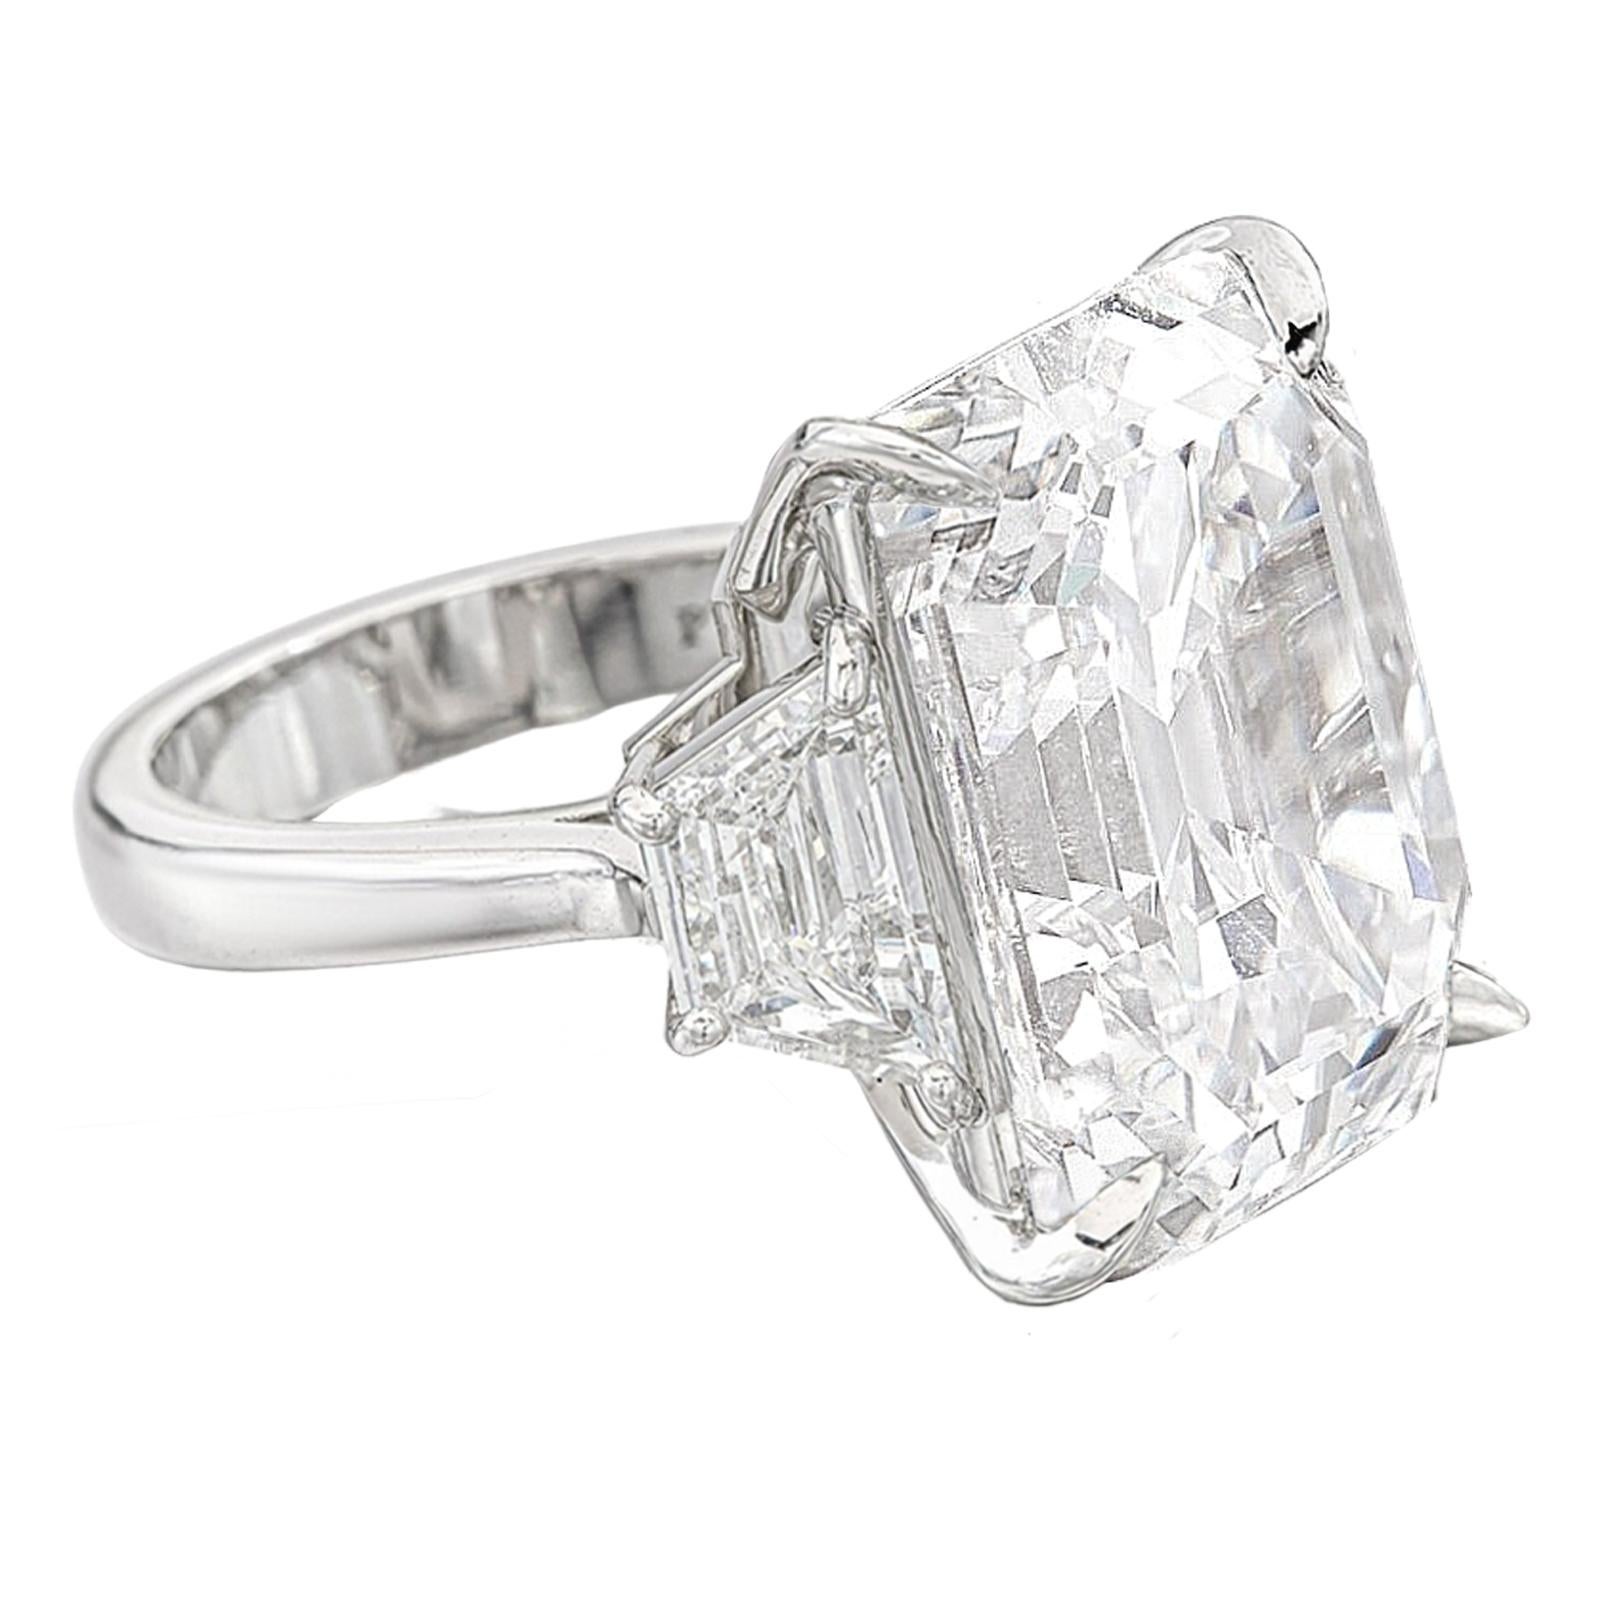 This mesmerizing ring boasts a mesmerizing GIA-certified centerpiece—a resplendent 4 carat Asscher cut diamond ensconced within a sublime 18k white gold setting.
The gem, meticulously graded by the renowned Gemological Institute of America (GIA)